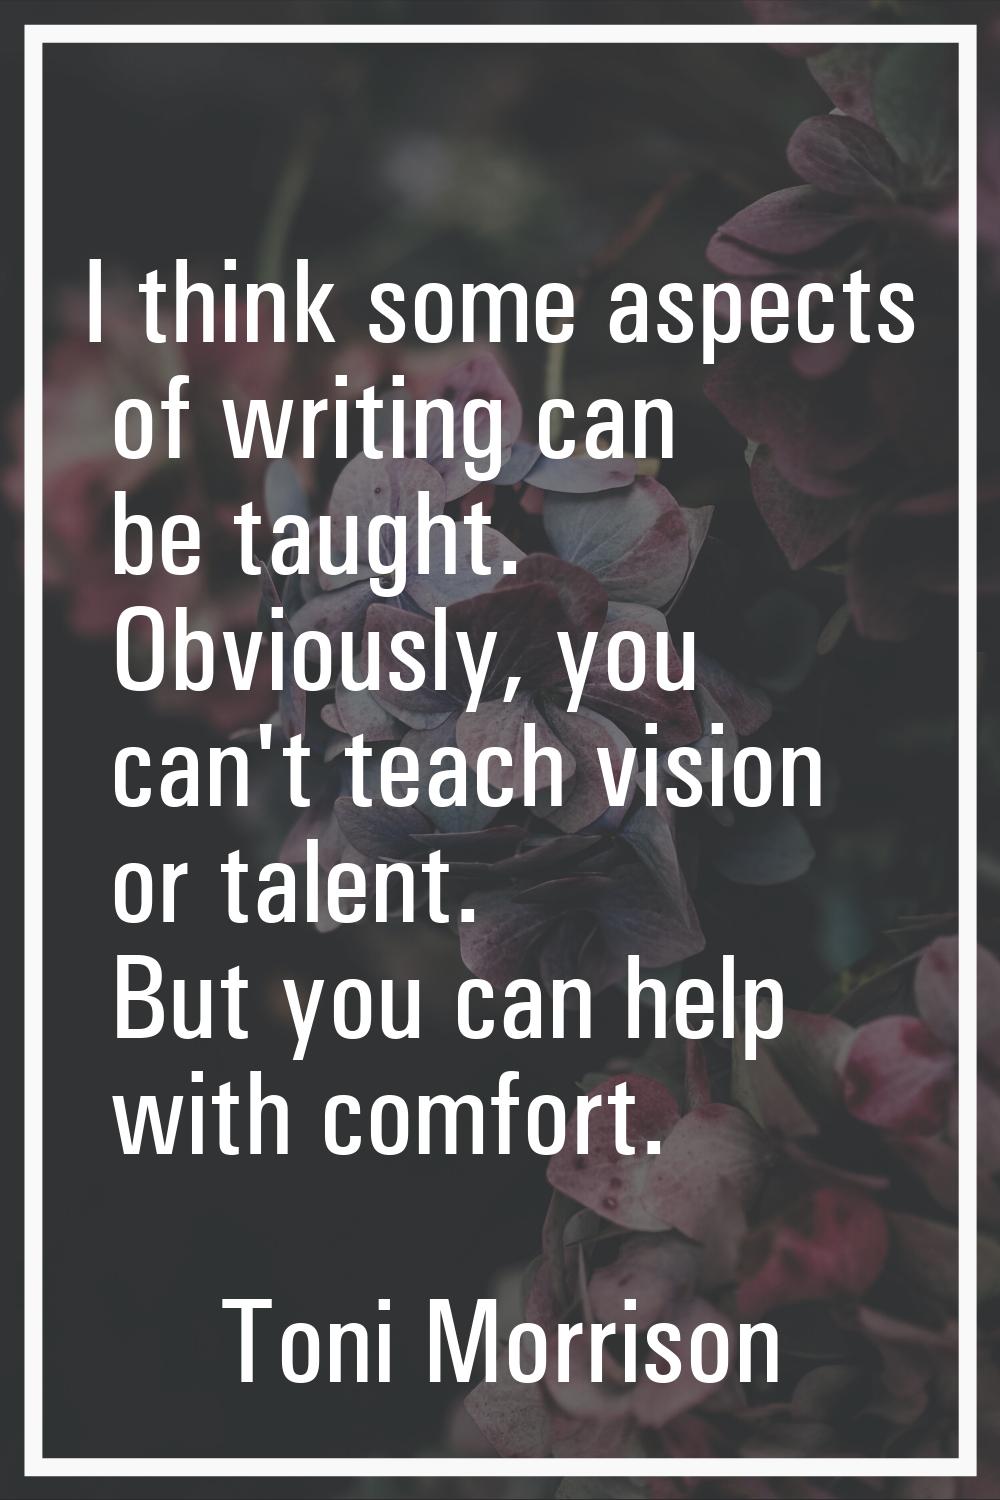 I think some aspects of writing can be taught. Obviously, you can't teach vision or talent. But you